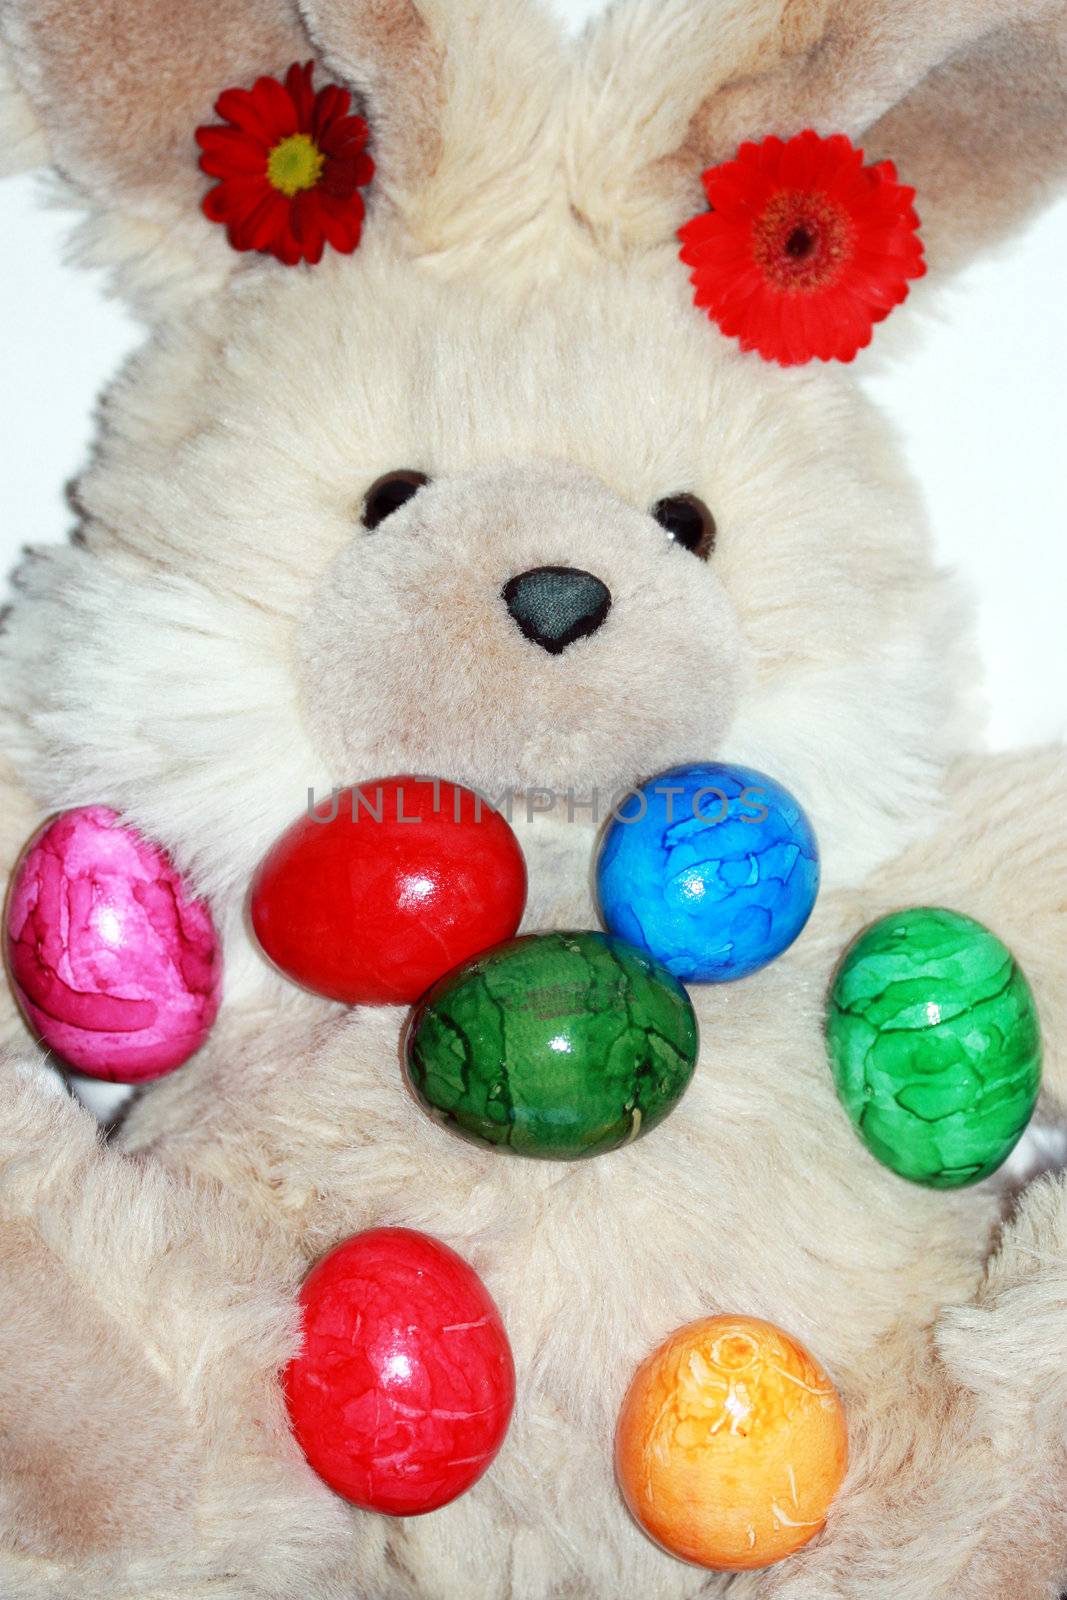 Easter bunny and colored eggs  by photochecker